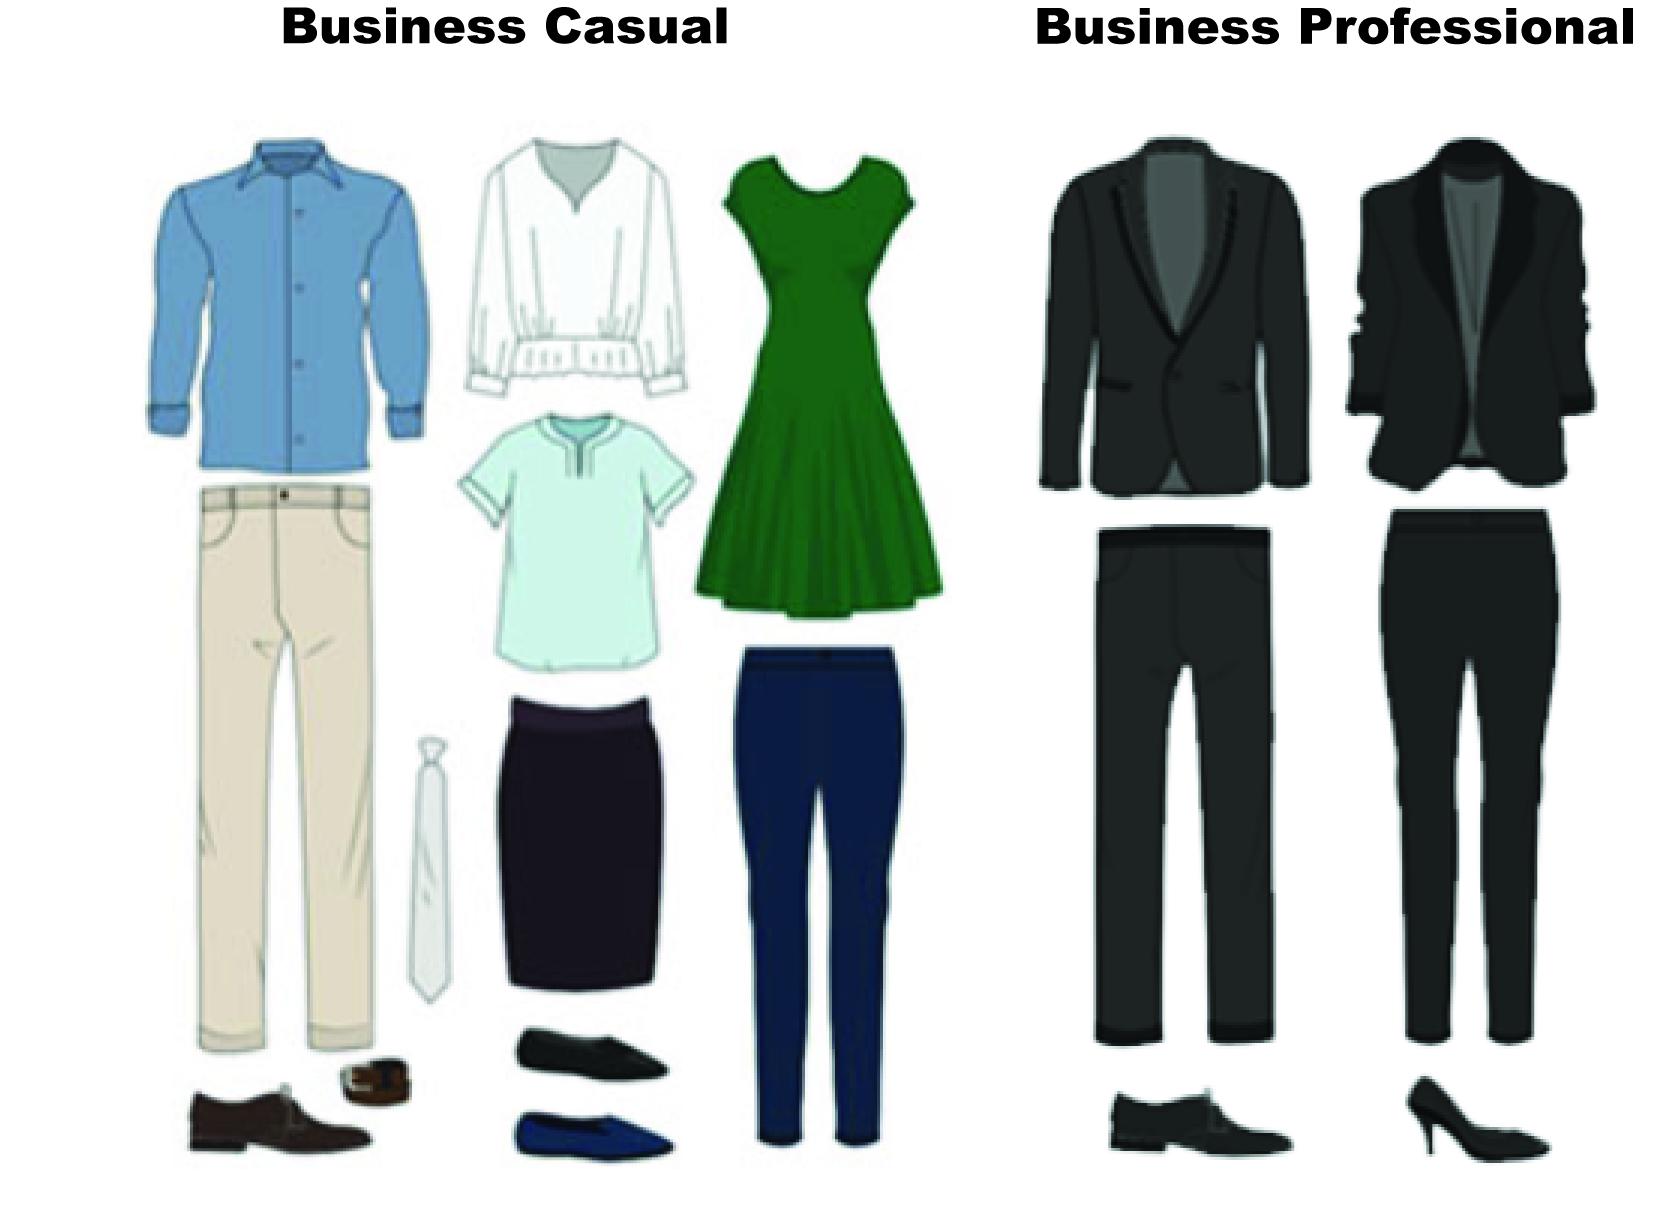 suggested clothing for men and women for business casual and business professional